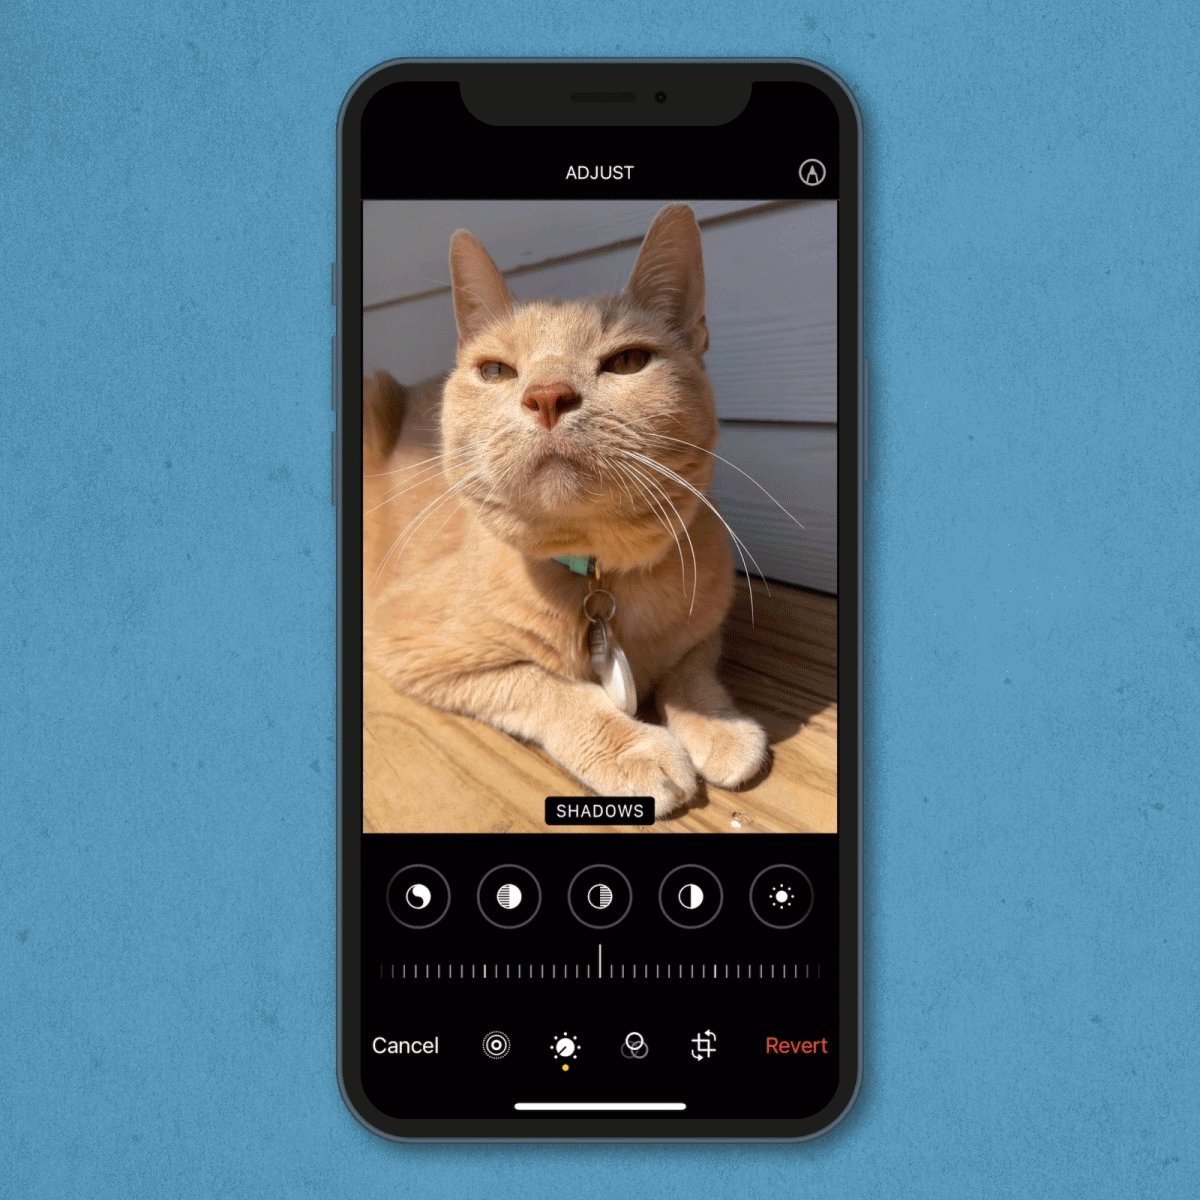 gif showing how to edit a photo's shadows on an iPhone